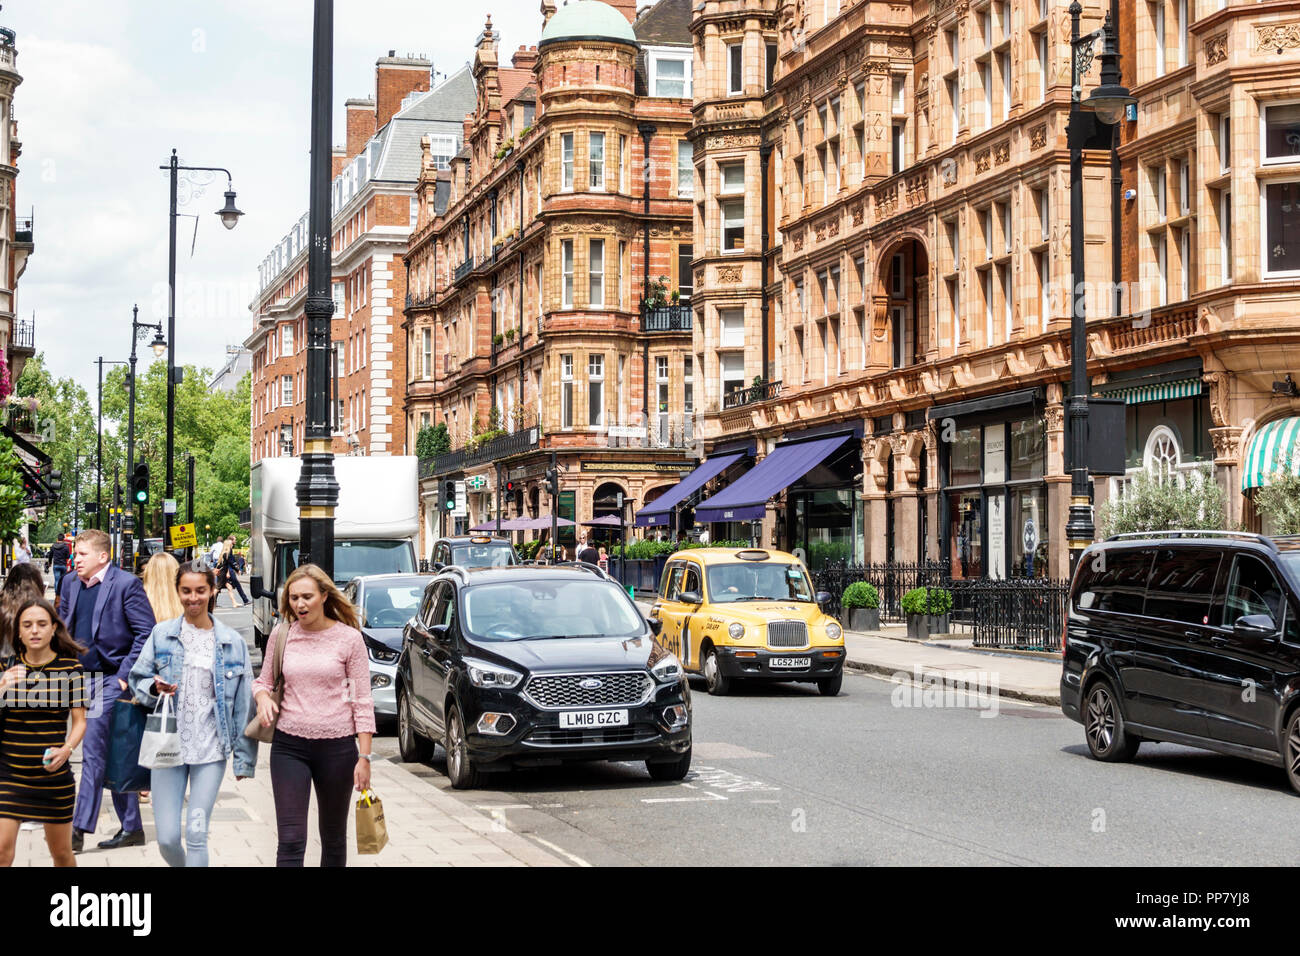 Londra Inghilterra,UK,West End City Westminster Mayfair,South Audley Street,edifici storici,negozi,pedoni,donne donne donne donne,taxi,UK GB inglese EUR Foto Stock